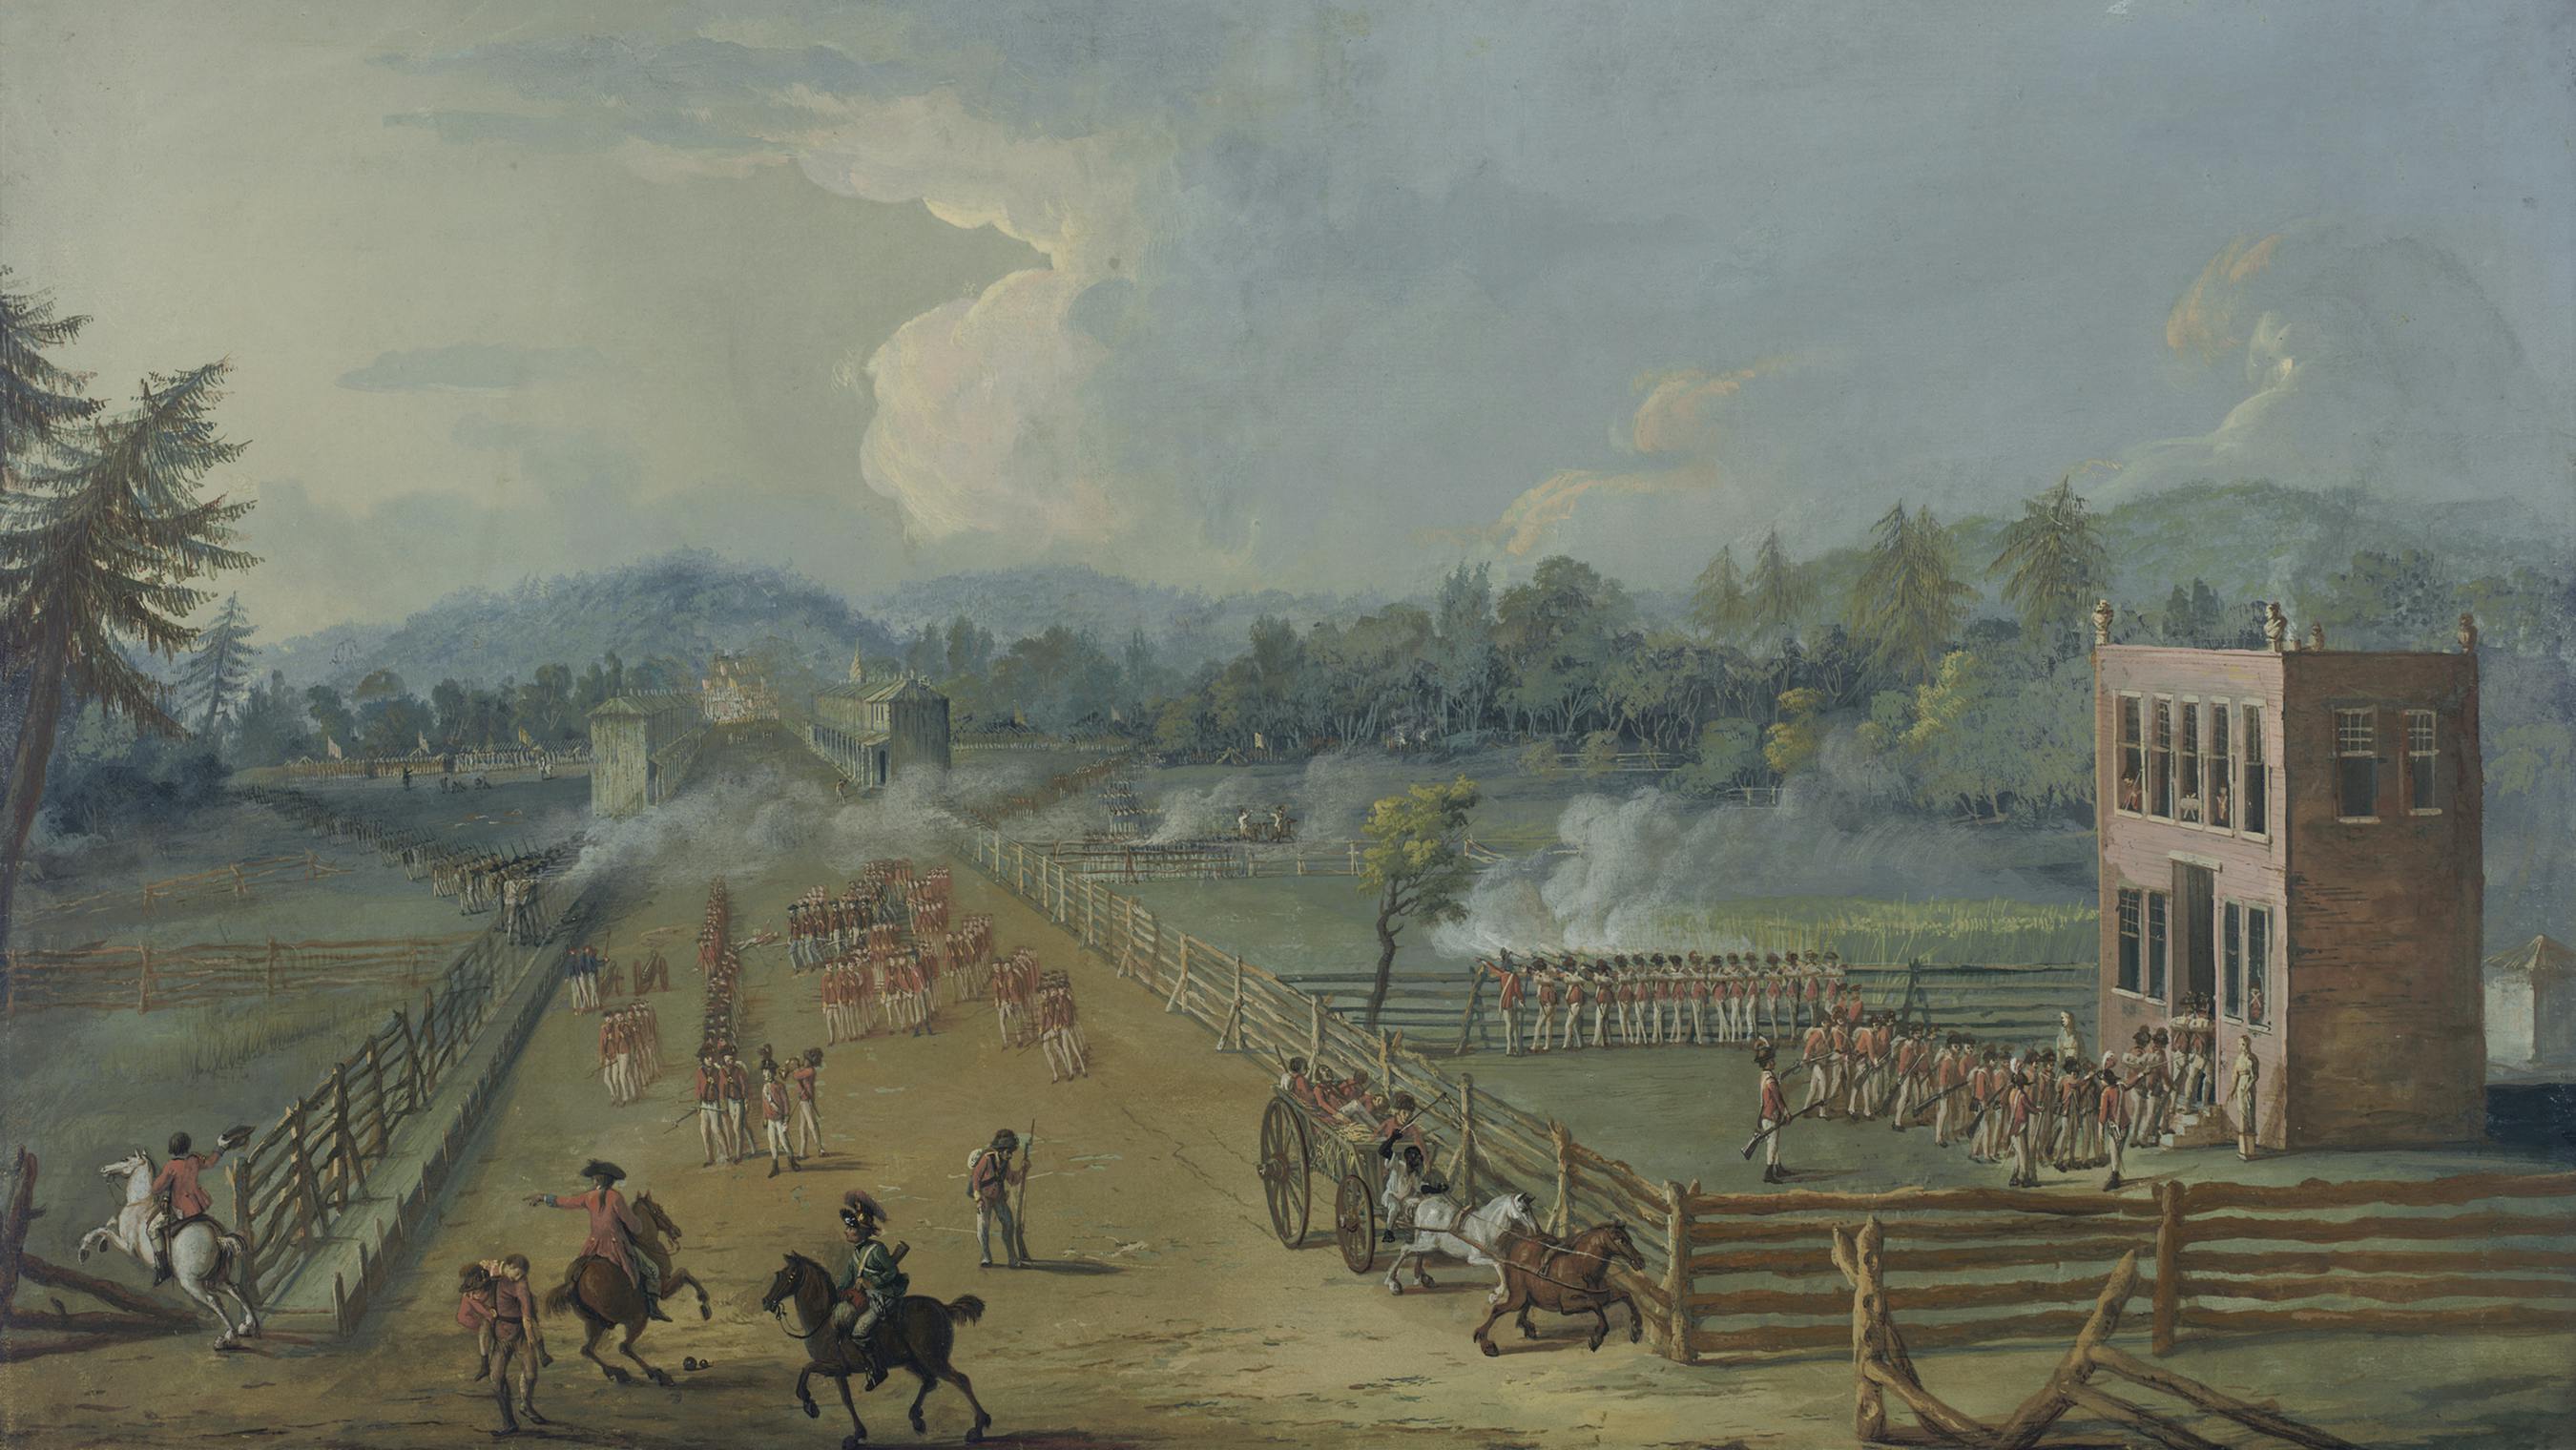 The Battle of Germantown